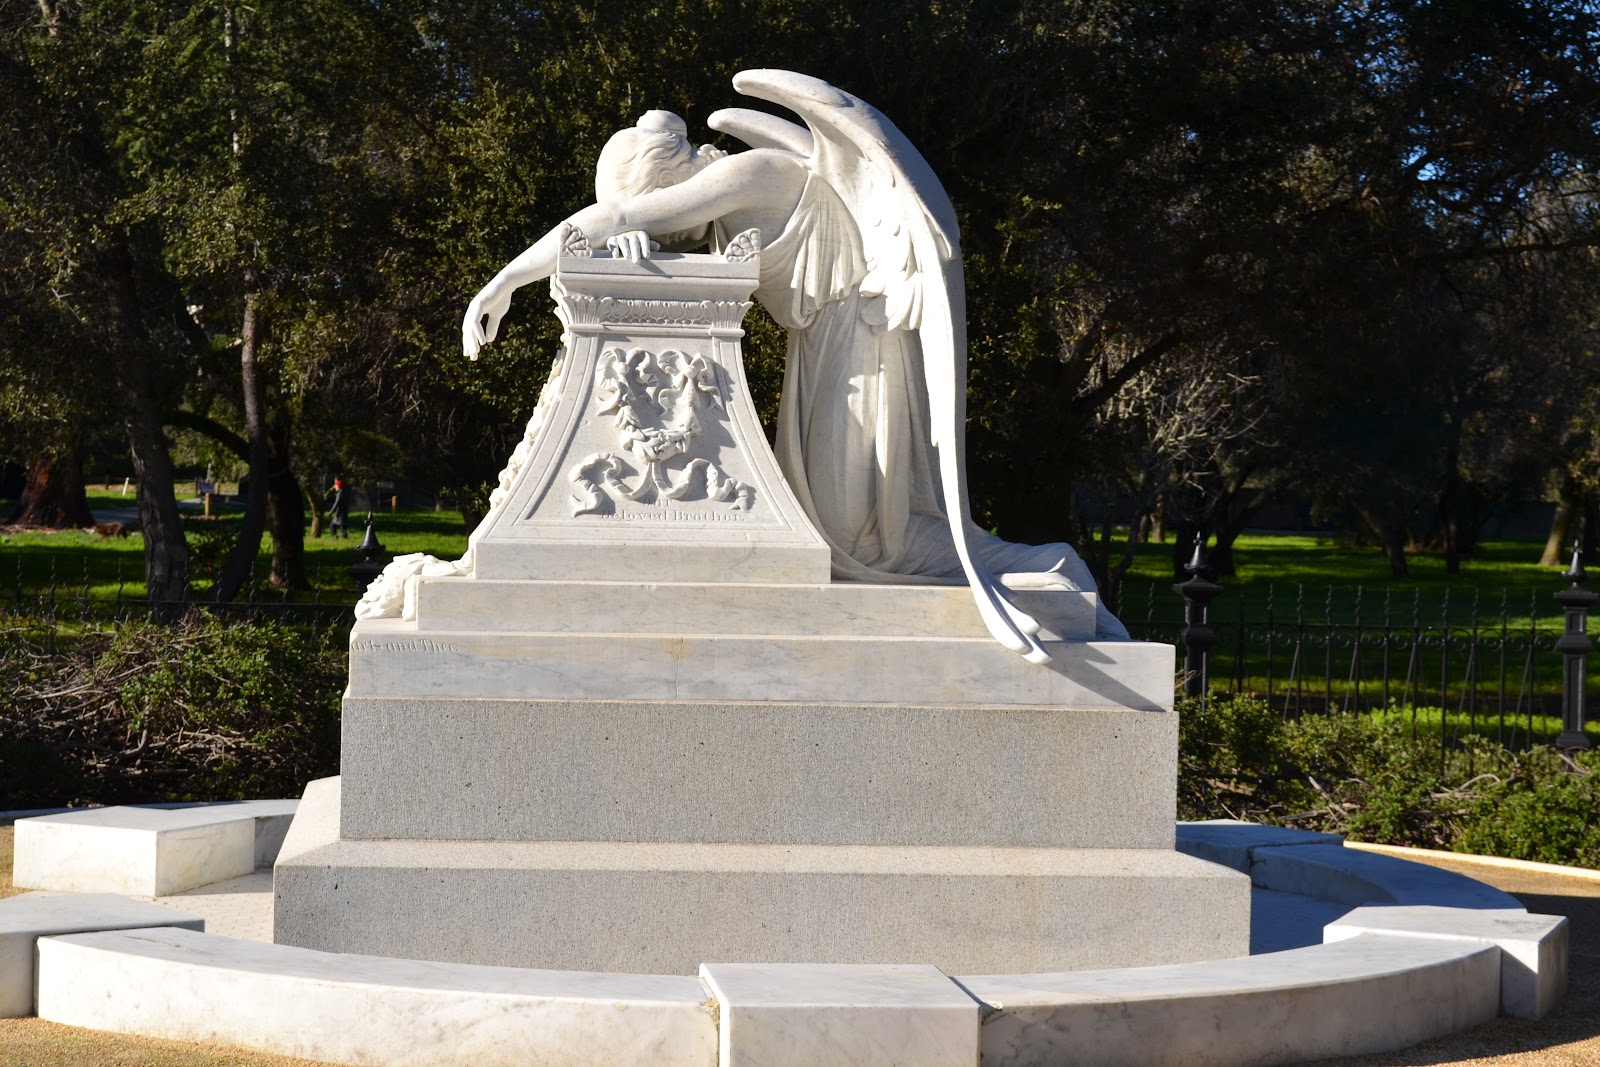 https://upload.wikimedia.org/wikipedia/commons/9/93/Angel_of_Grief_at_Stanford_University_profile_view.JPG